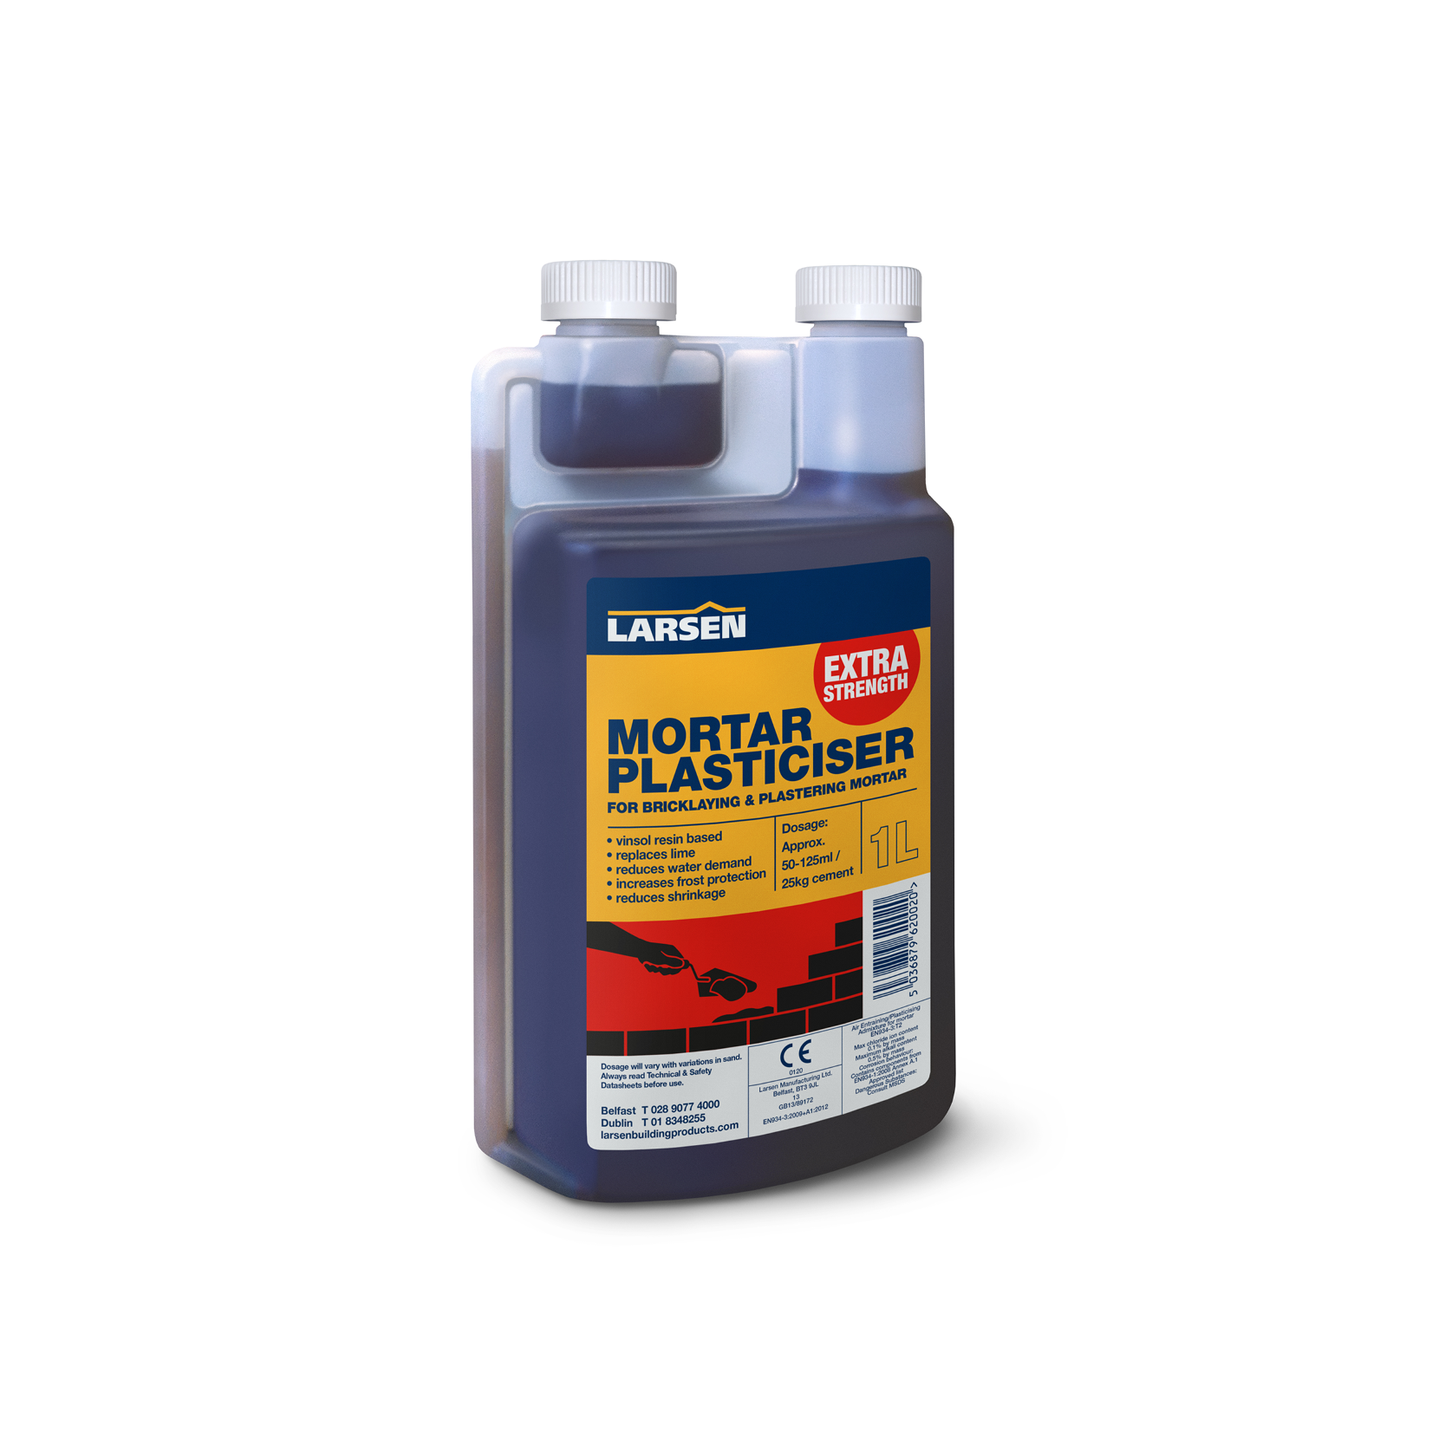 Concentrated Mortar Plasticiser